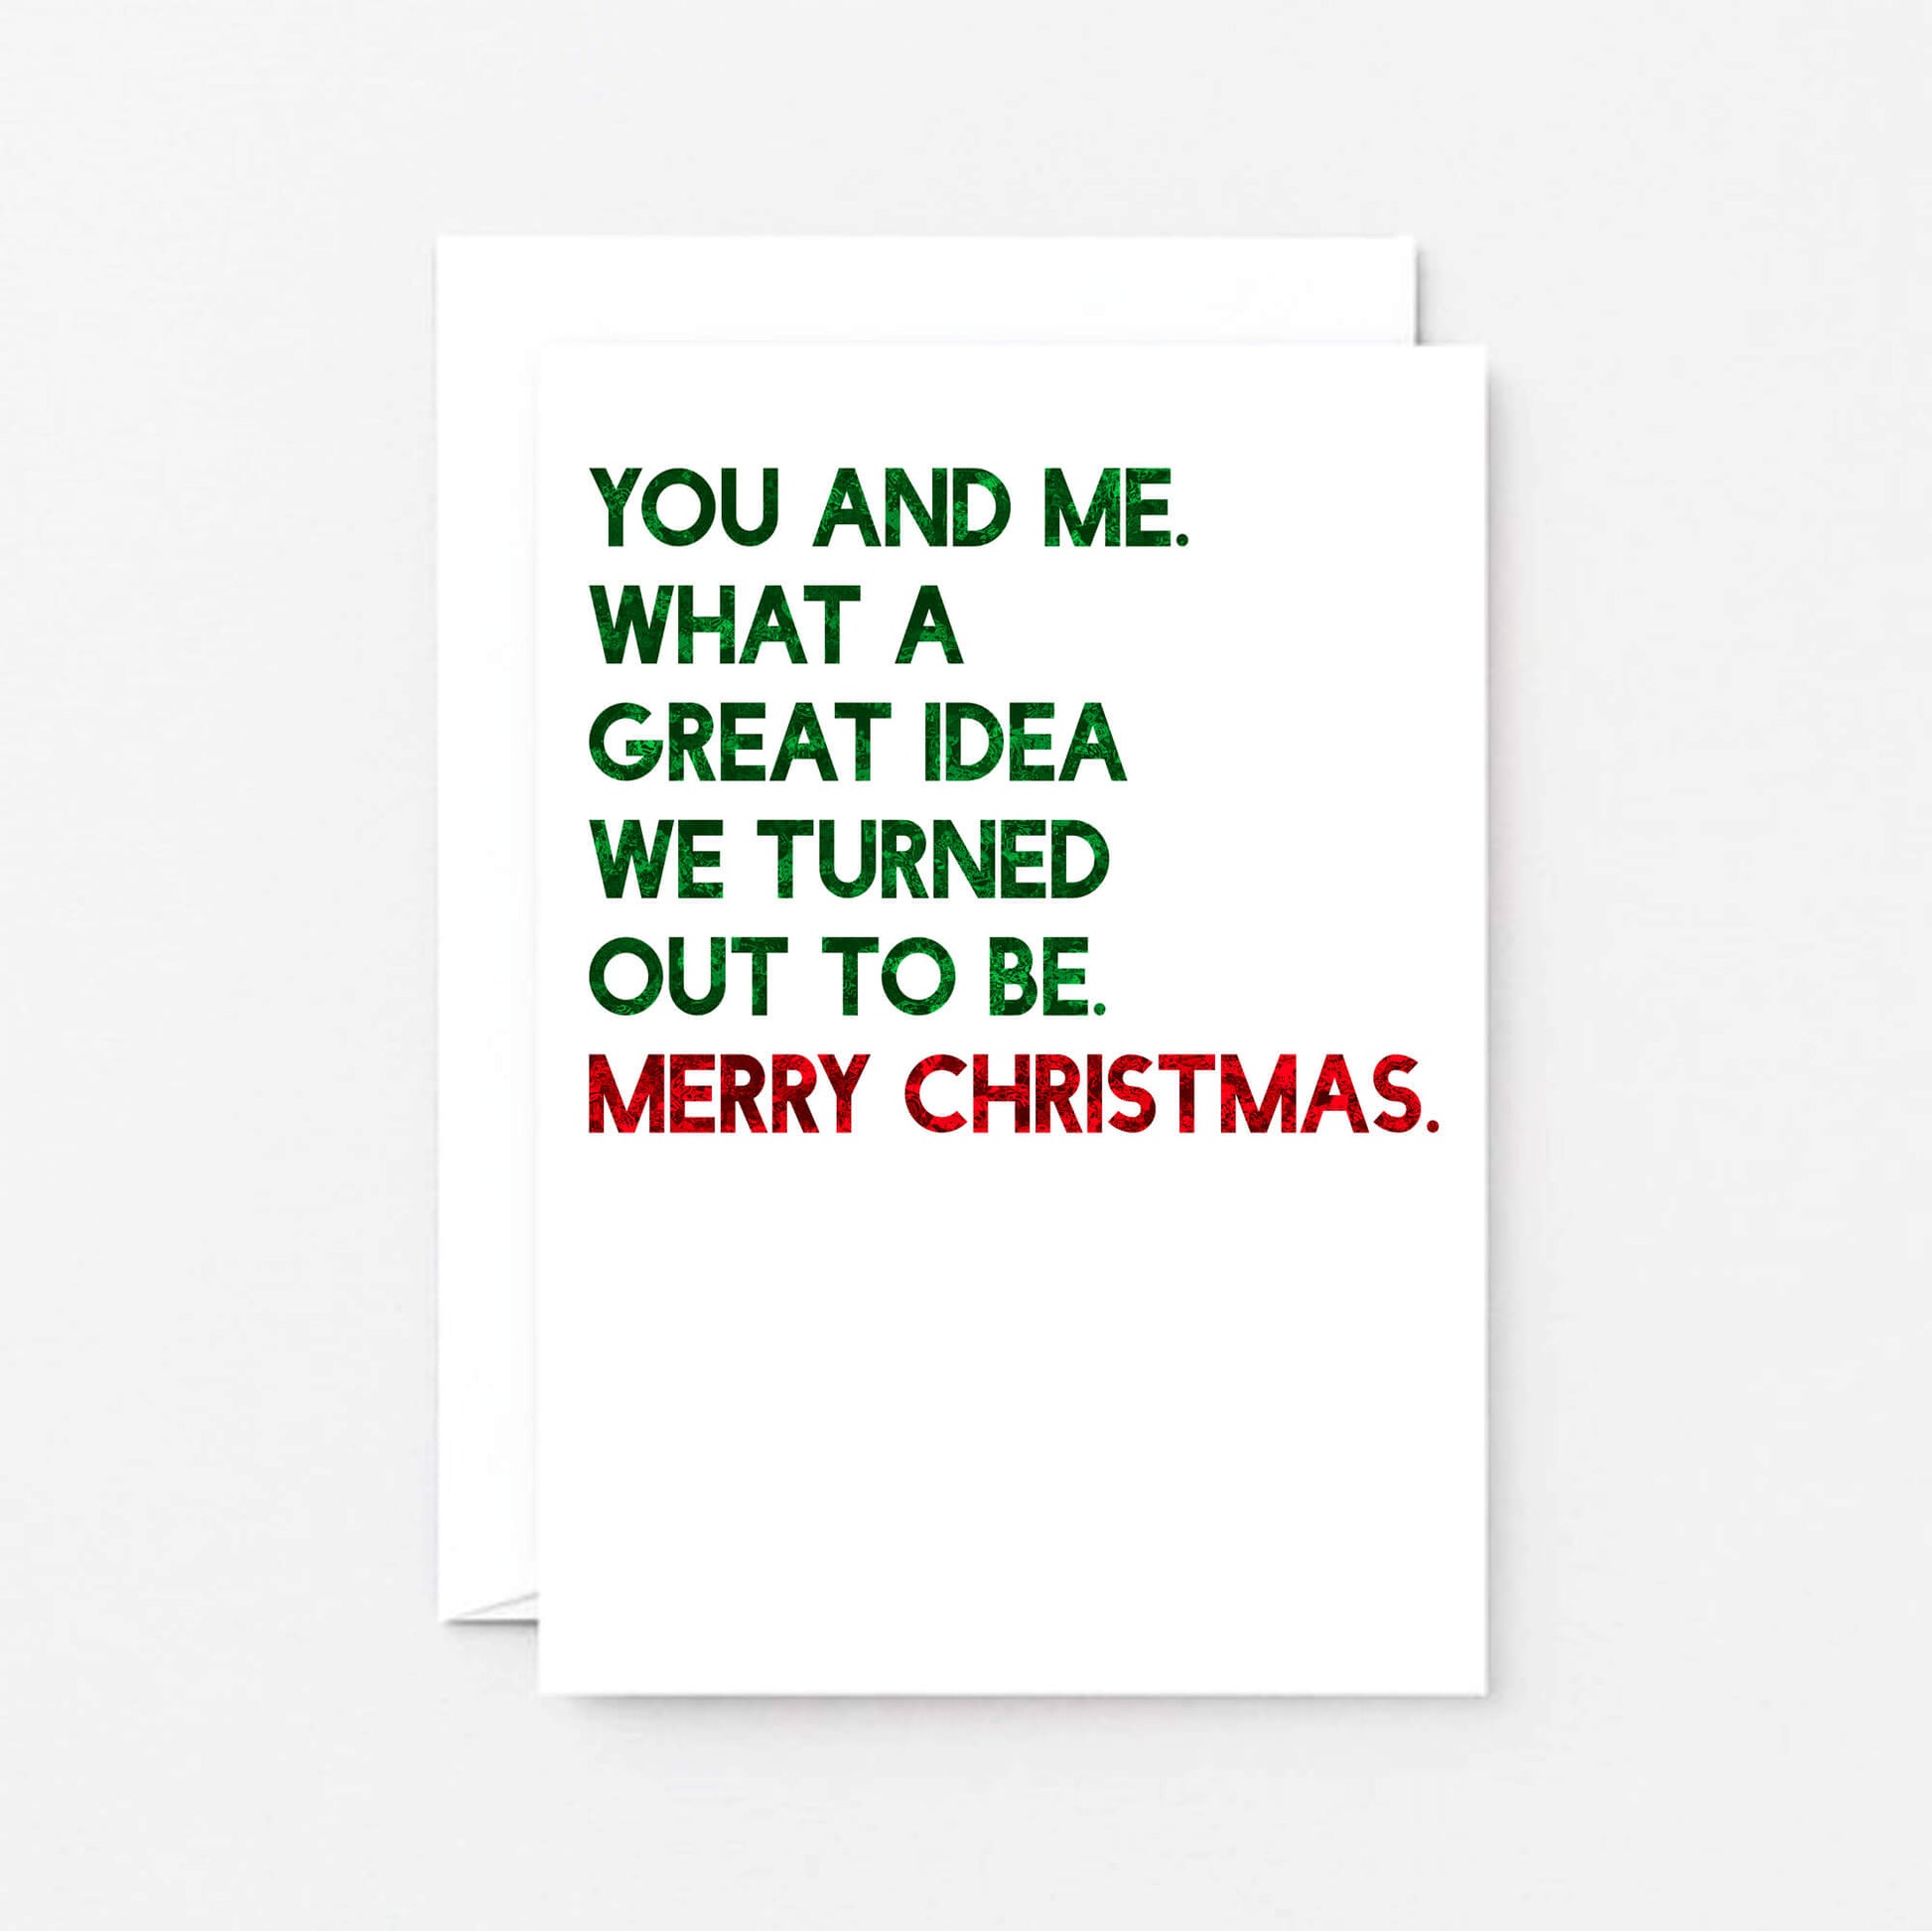 Christmas Card by SixElevenCreations. Reads You and me. What a great idea we turned out to be. Merry Christmas. Product Code SEC0051A6